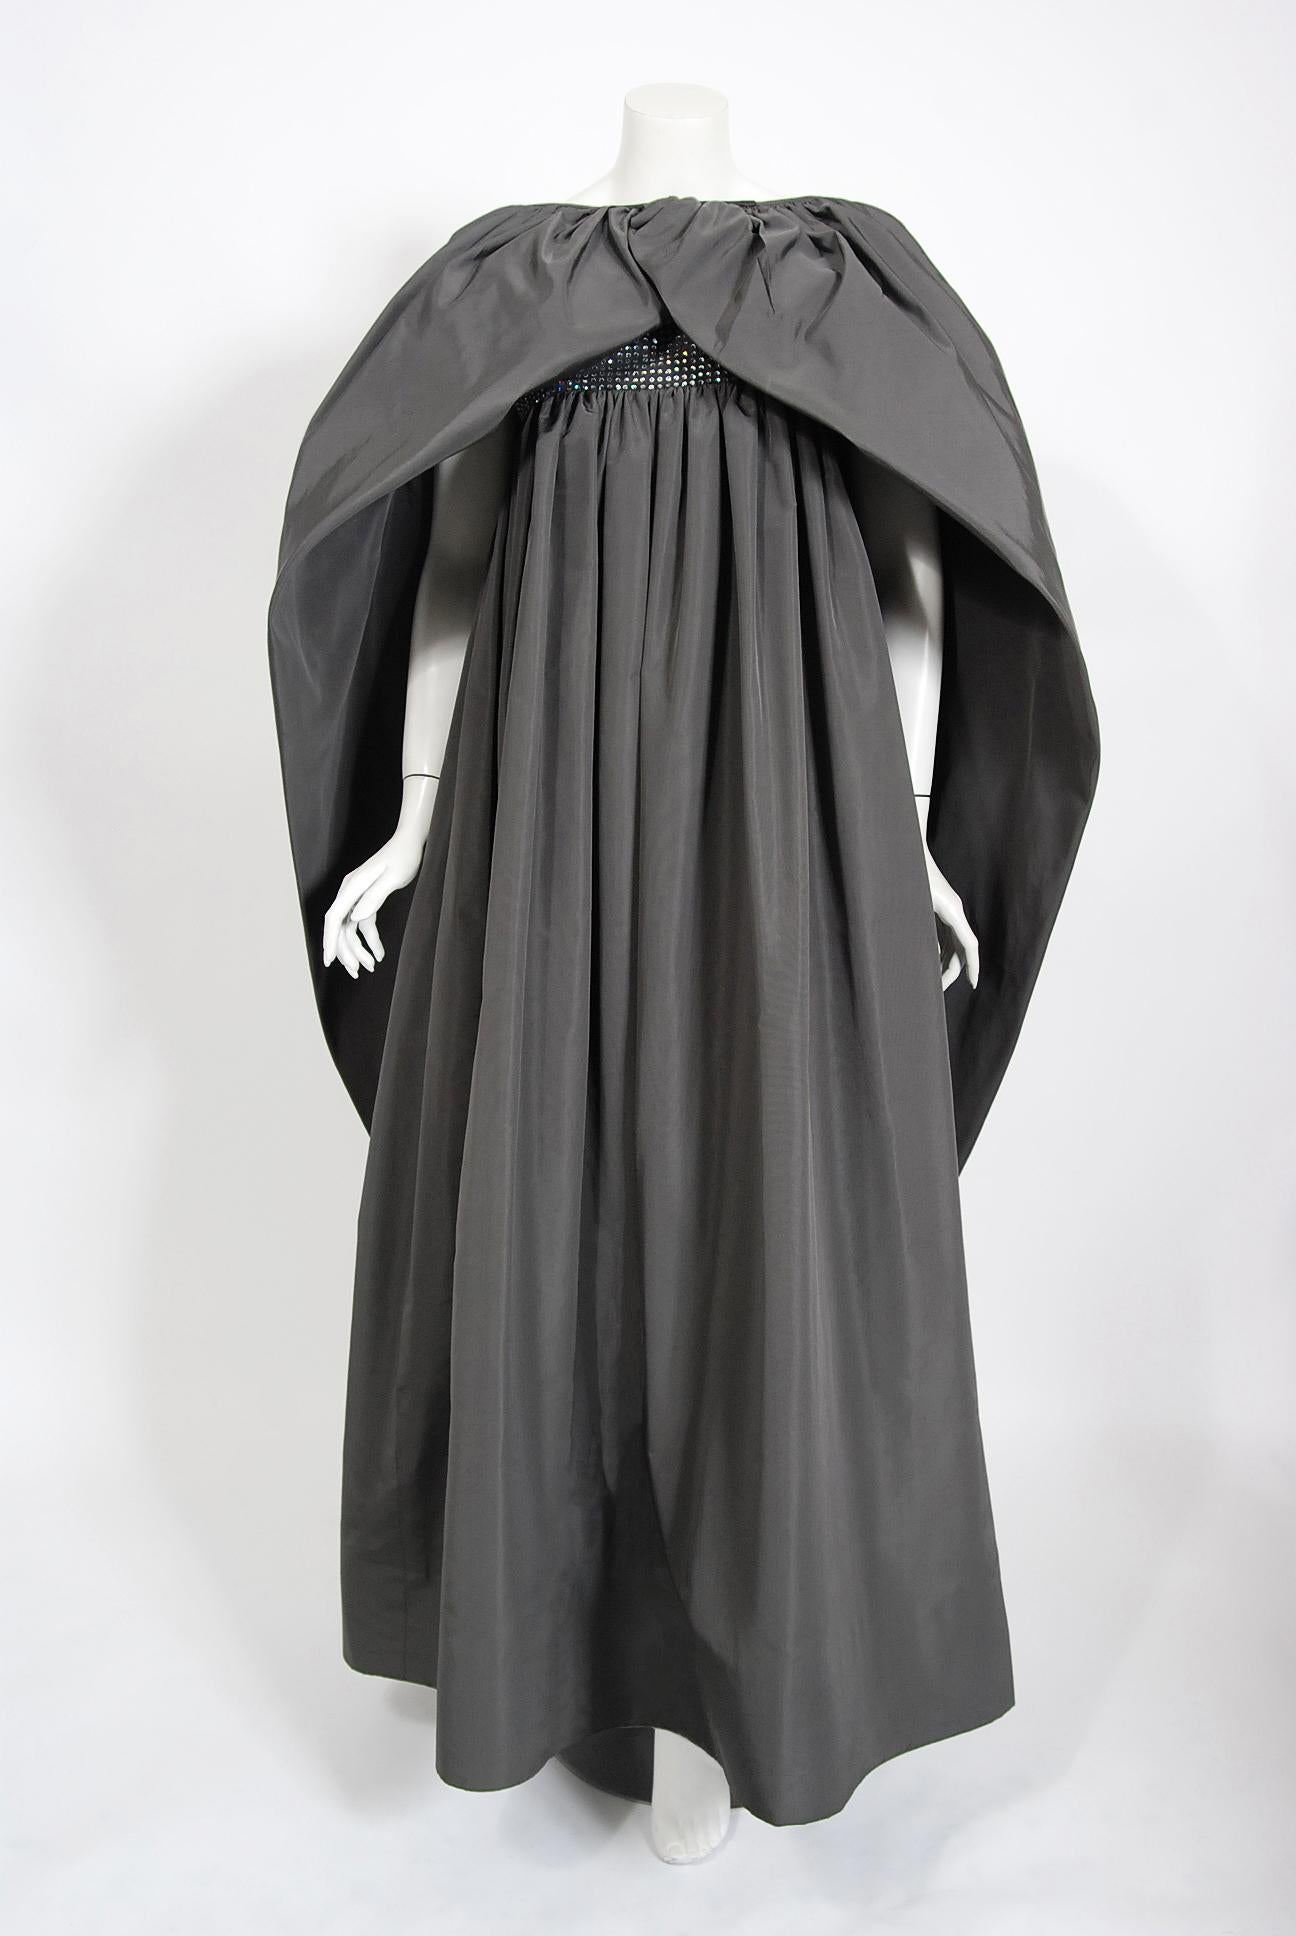 Spectacular Pierre Cardin haute couture gown and voluminous cape ensemble dating back to the his fall-winter 1978 collection  In 1951 Cardin opened his own couture house and by 1957, he started a ready-to-wear line; a bold move for a French